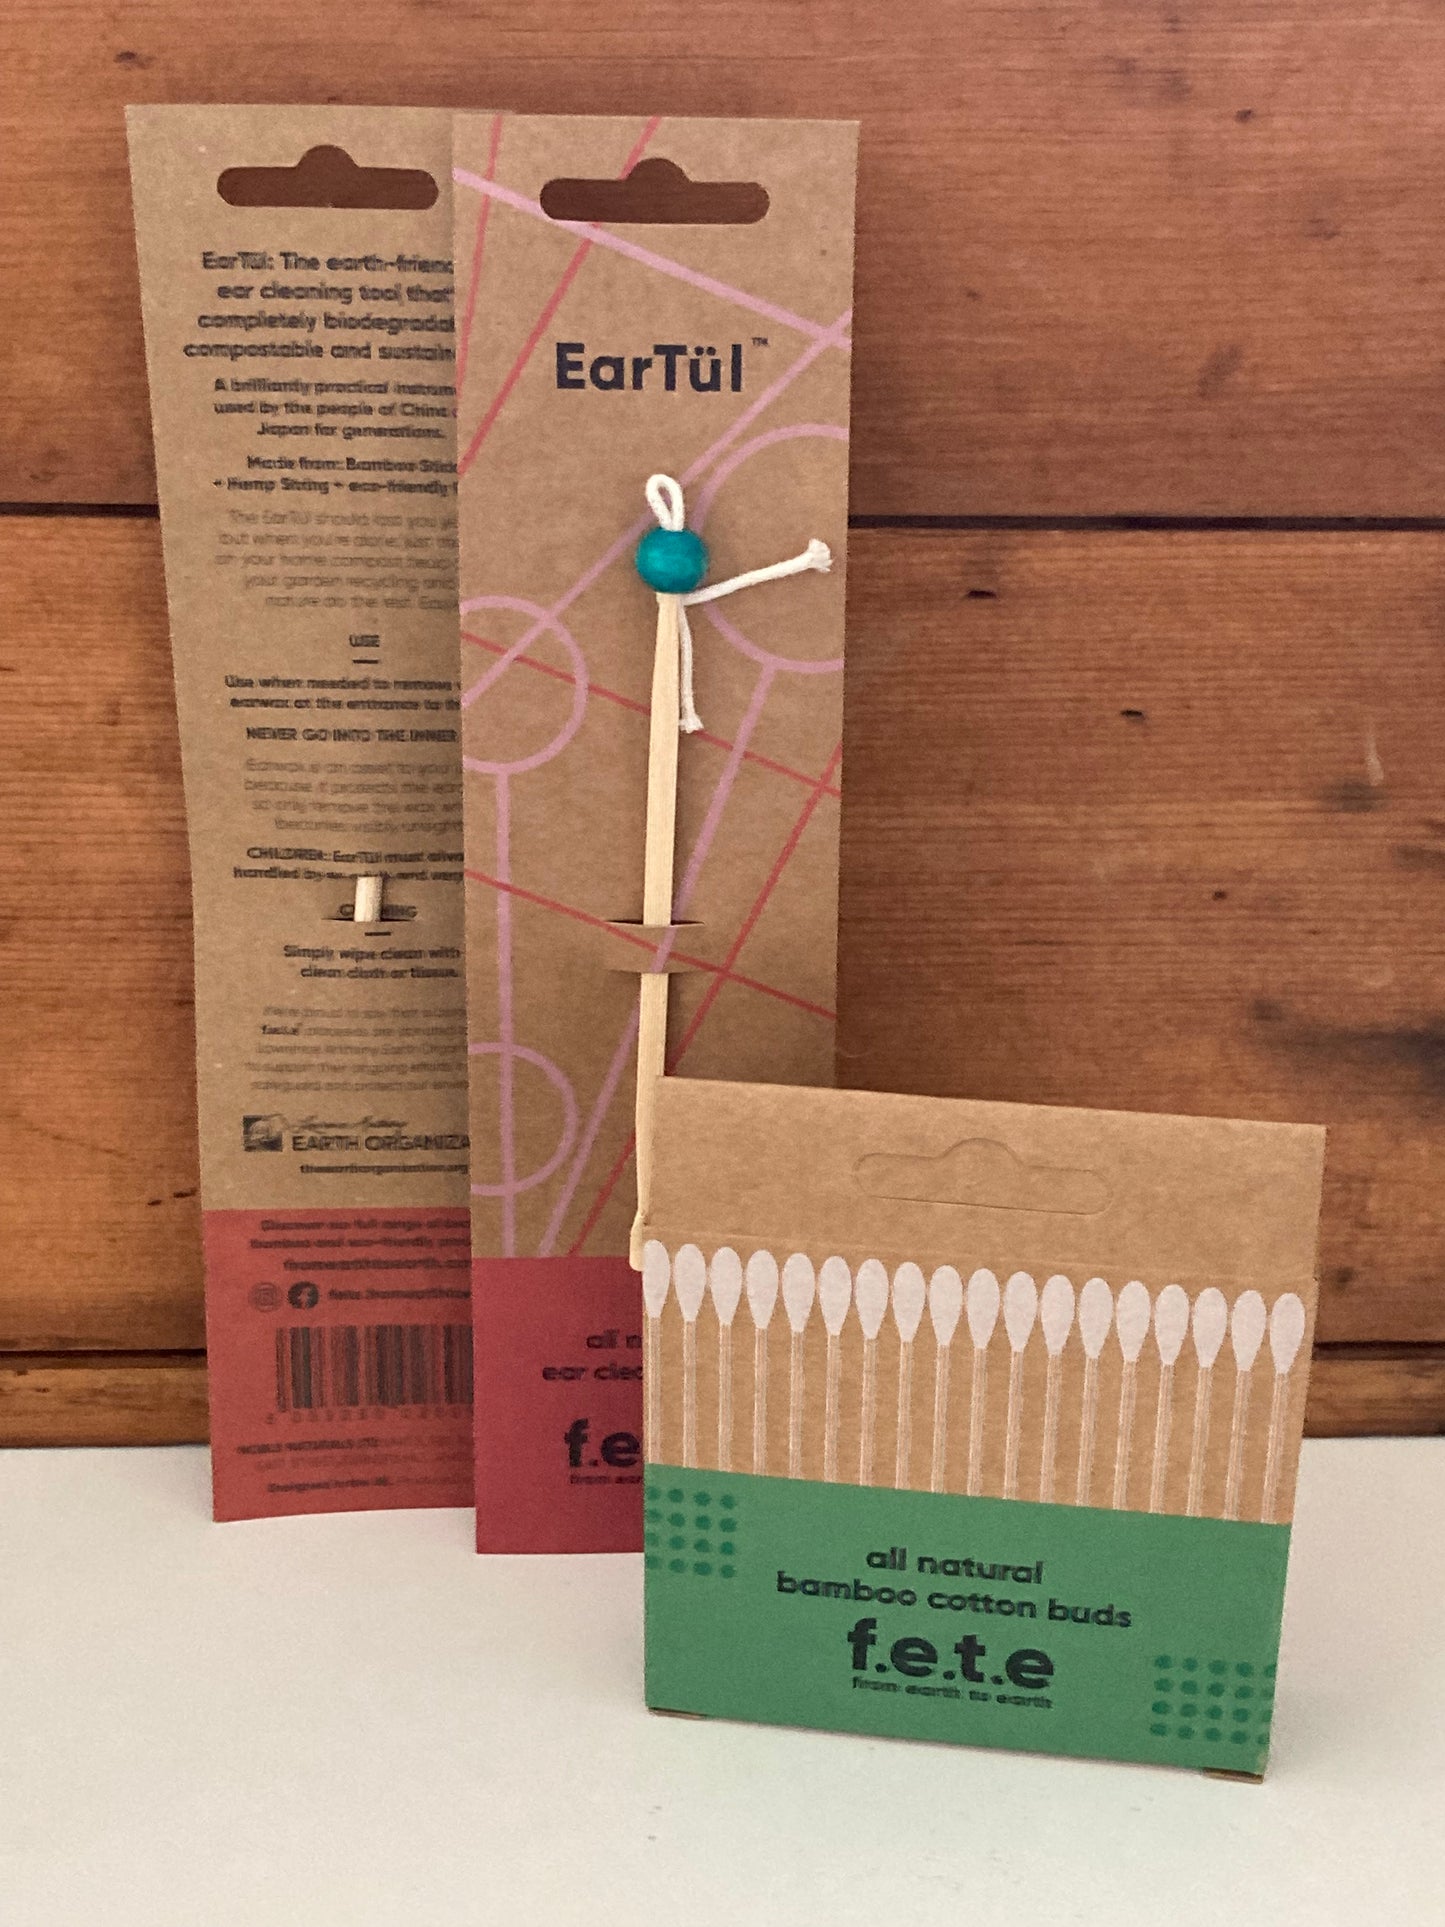 Eco Friendly Holistic EAR CLEANING TOOL, Compostable!